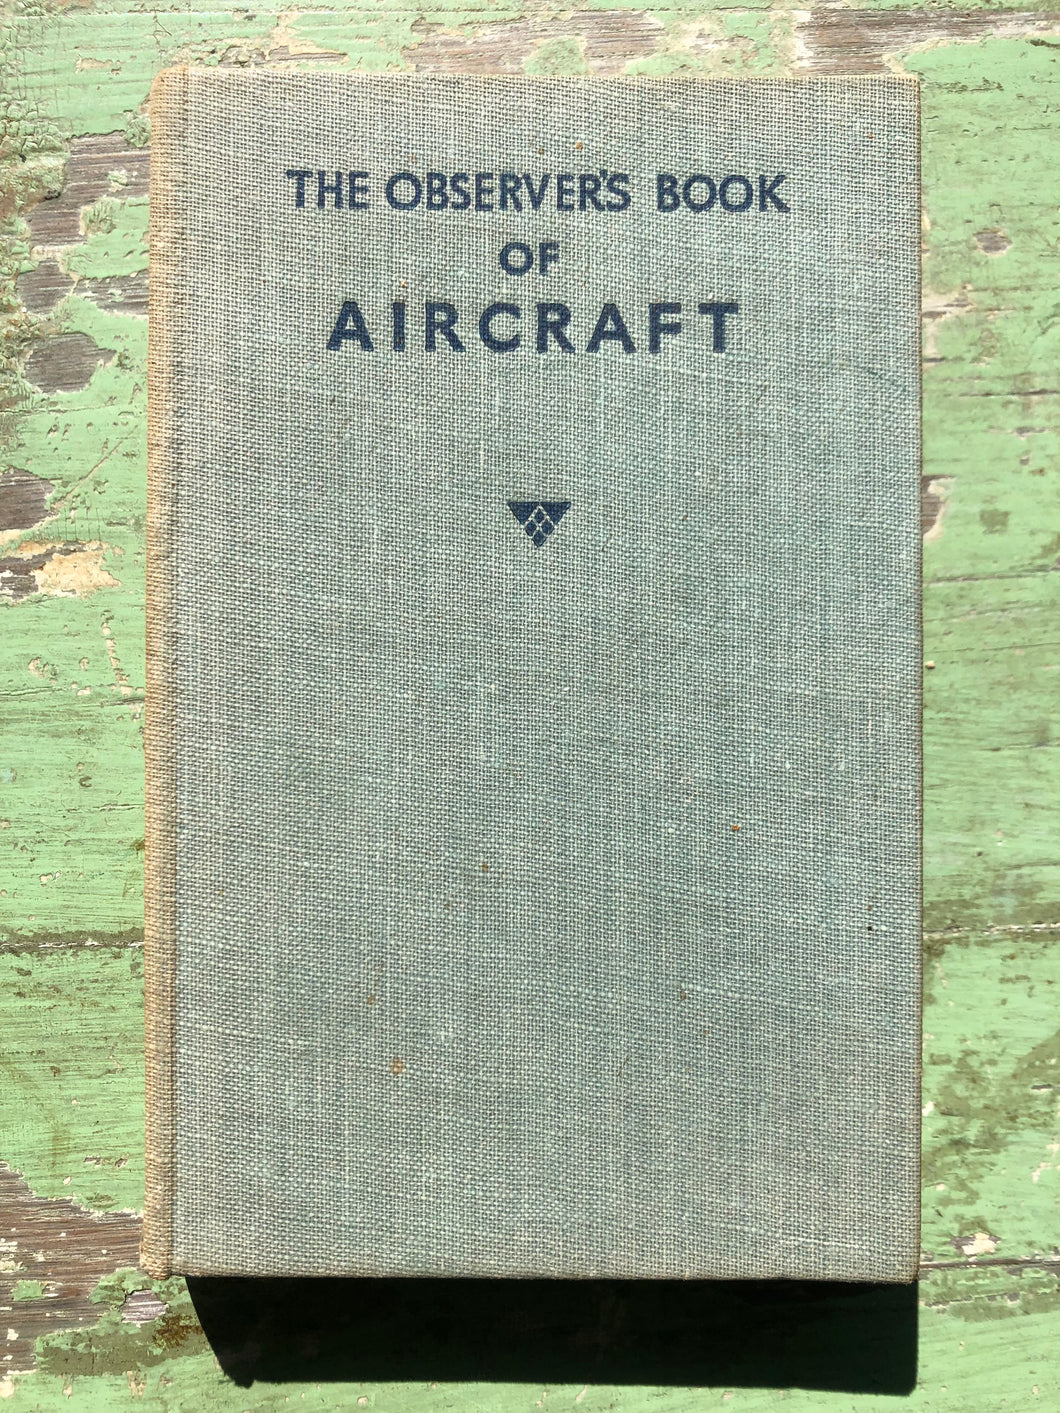 The Observer's Book of Aircraft. Compiled by William Green and Gerald Pollinger